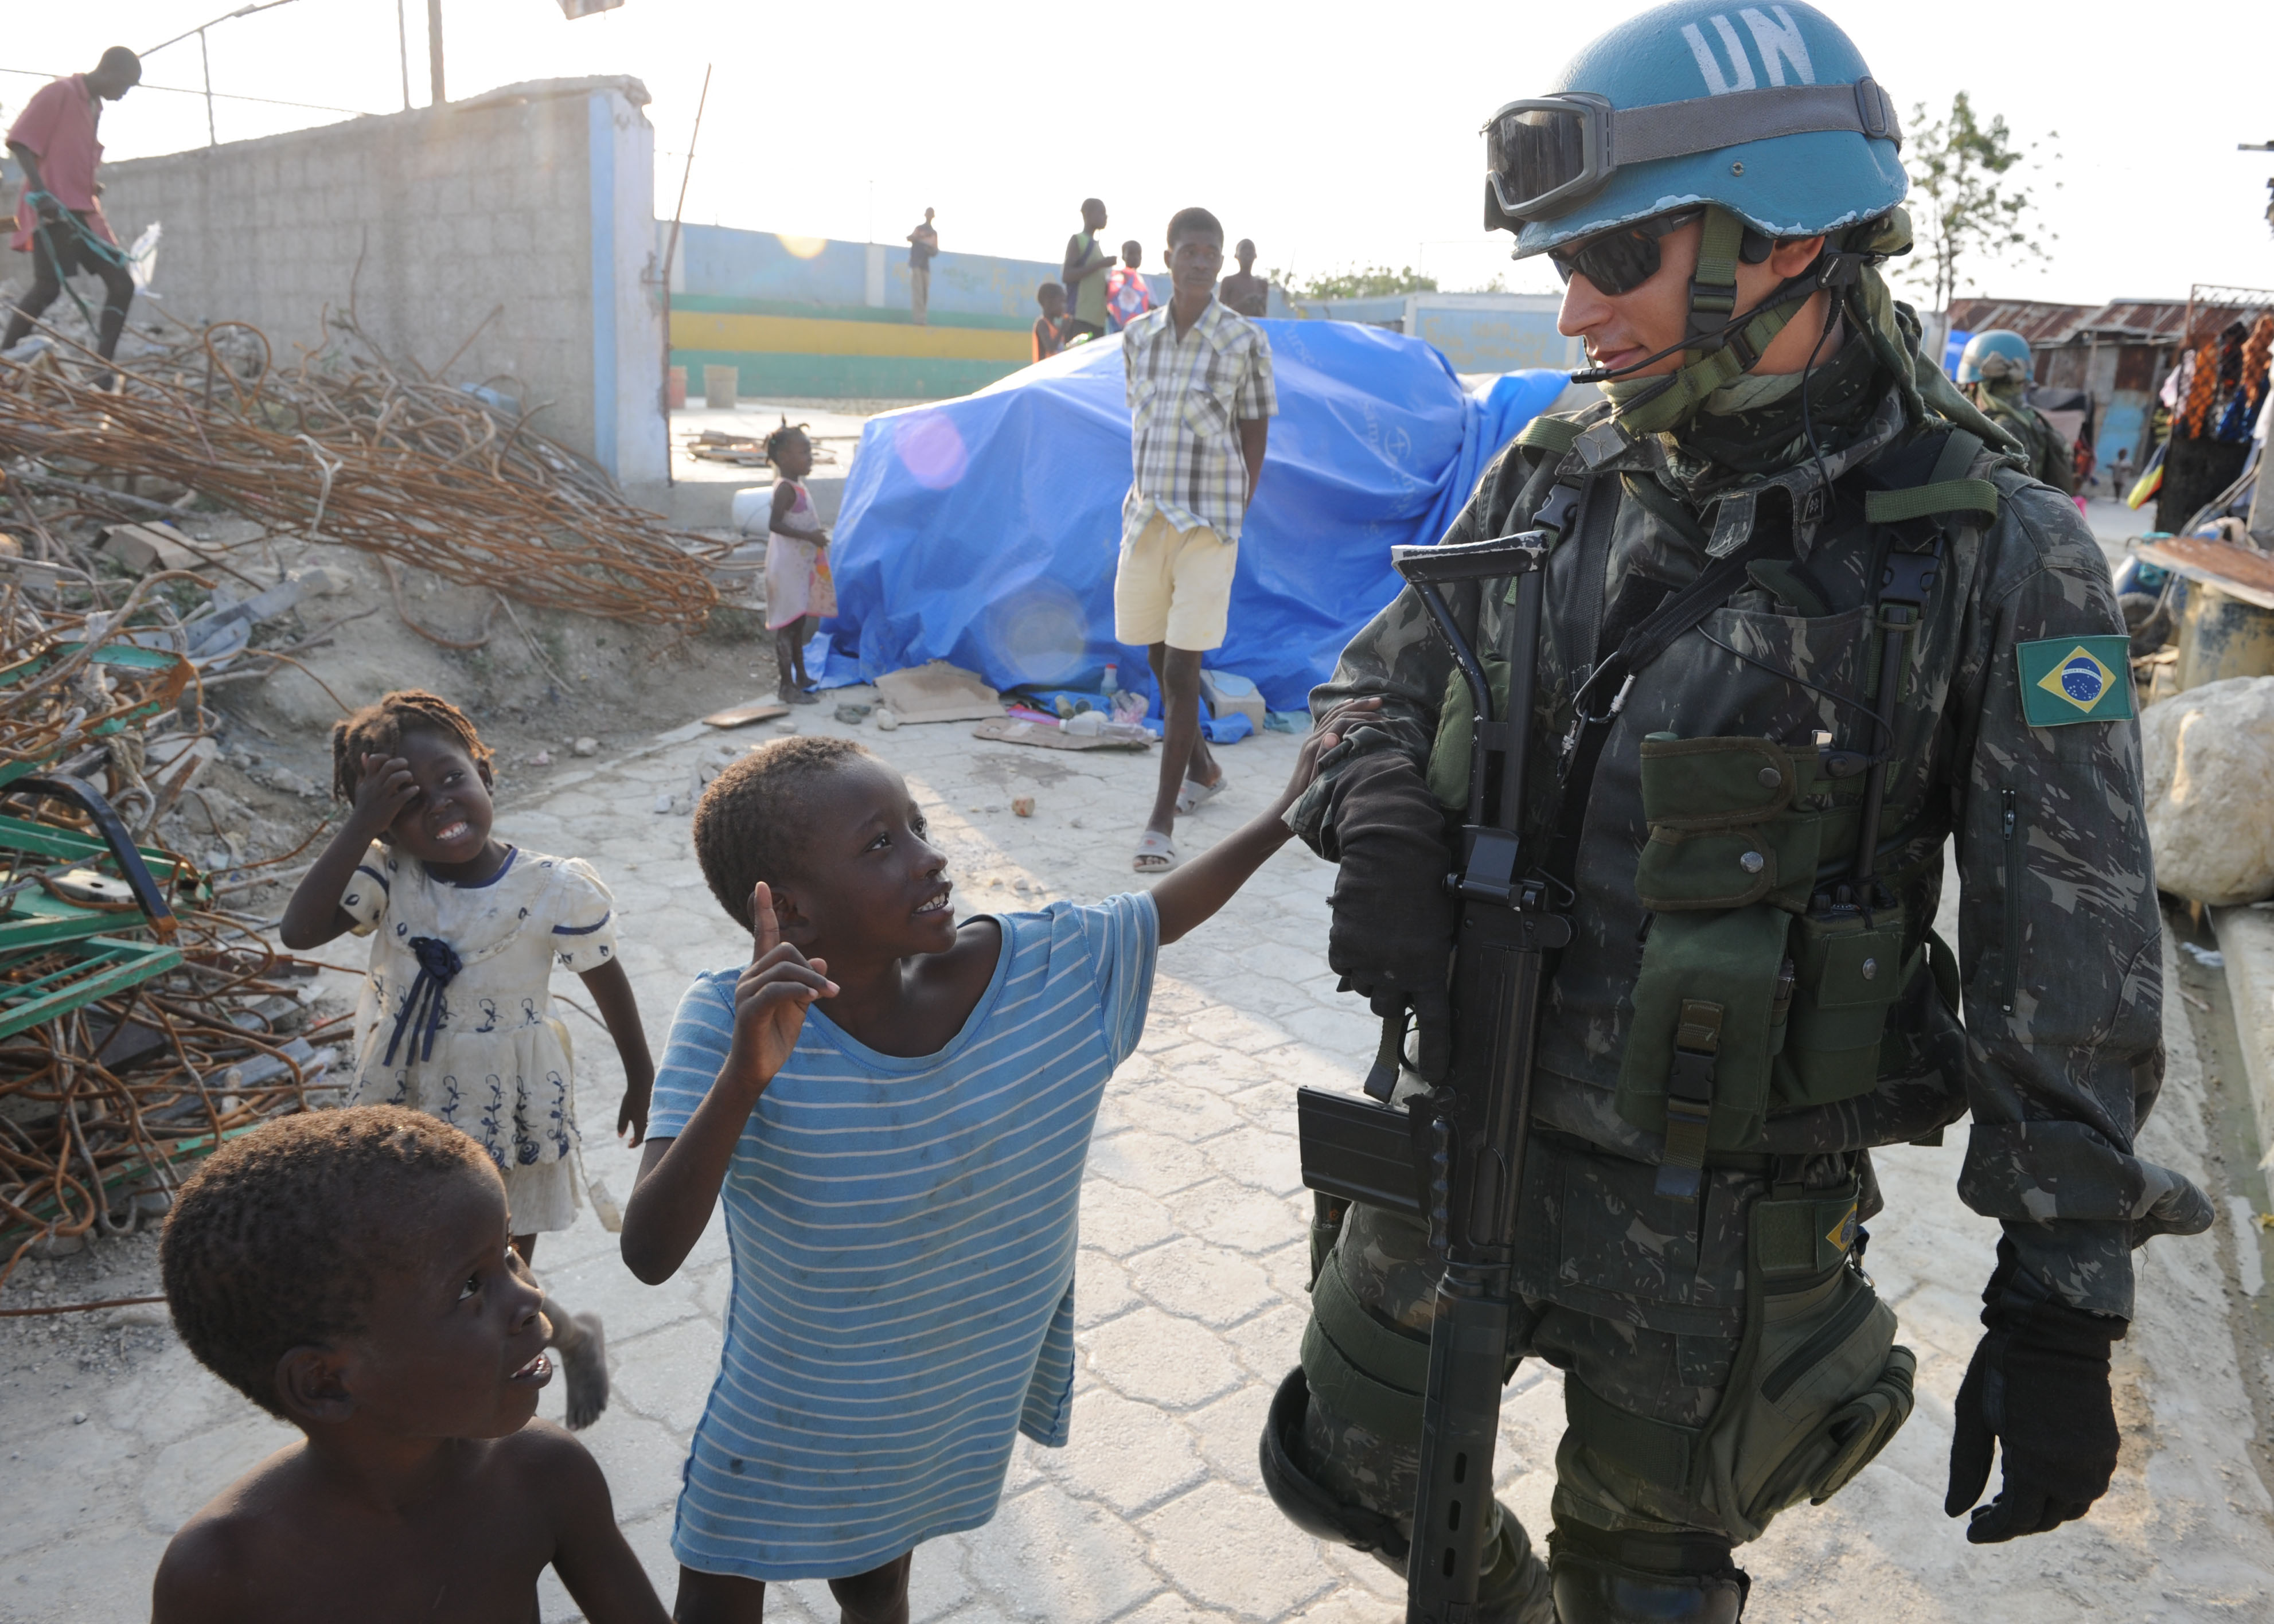 UN peacekeepers’ alleged abuse of children